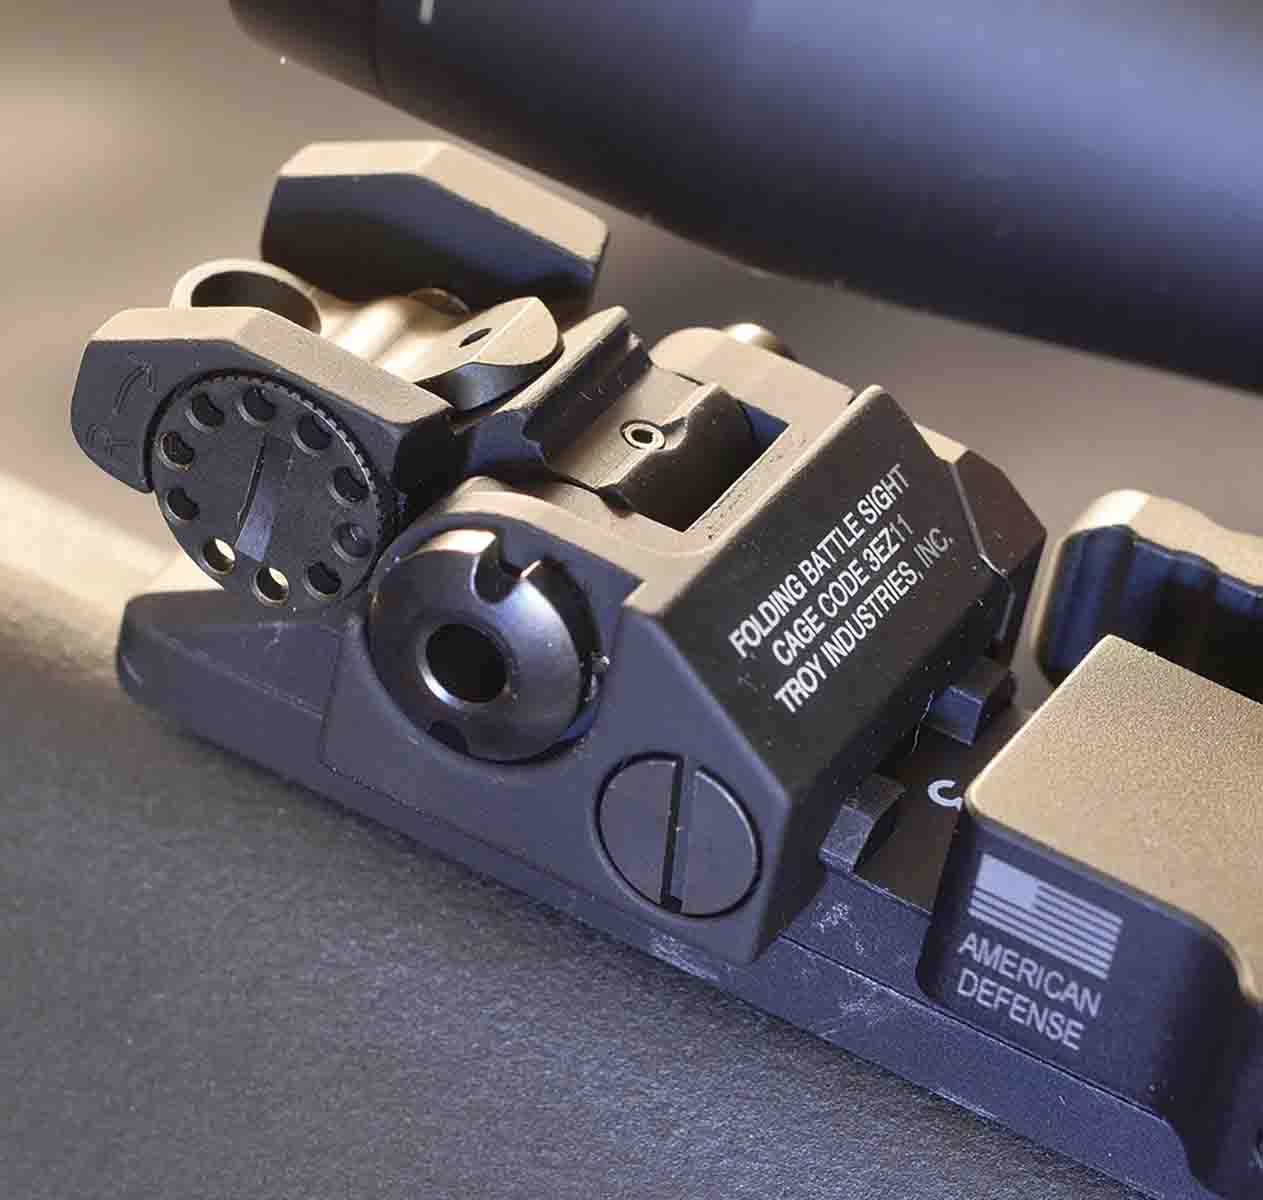 A variety of after-market battle sights will fit on the AUG/A3 with its Picatinny rails.